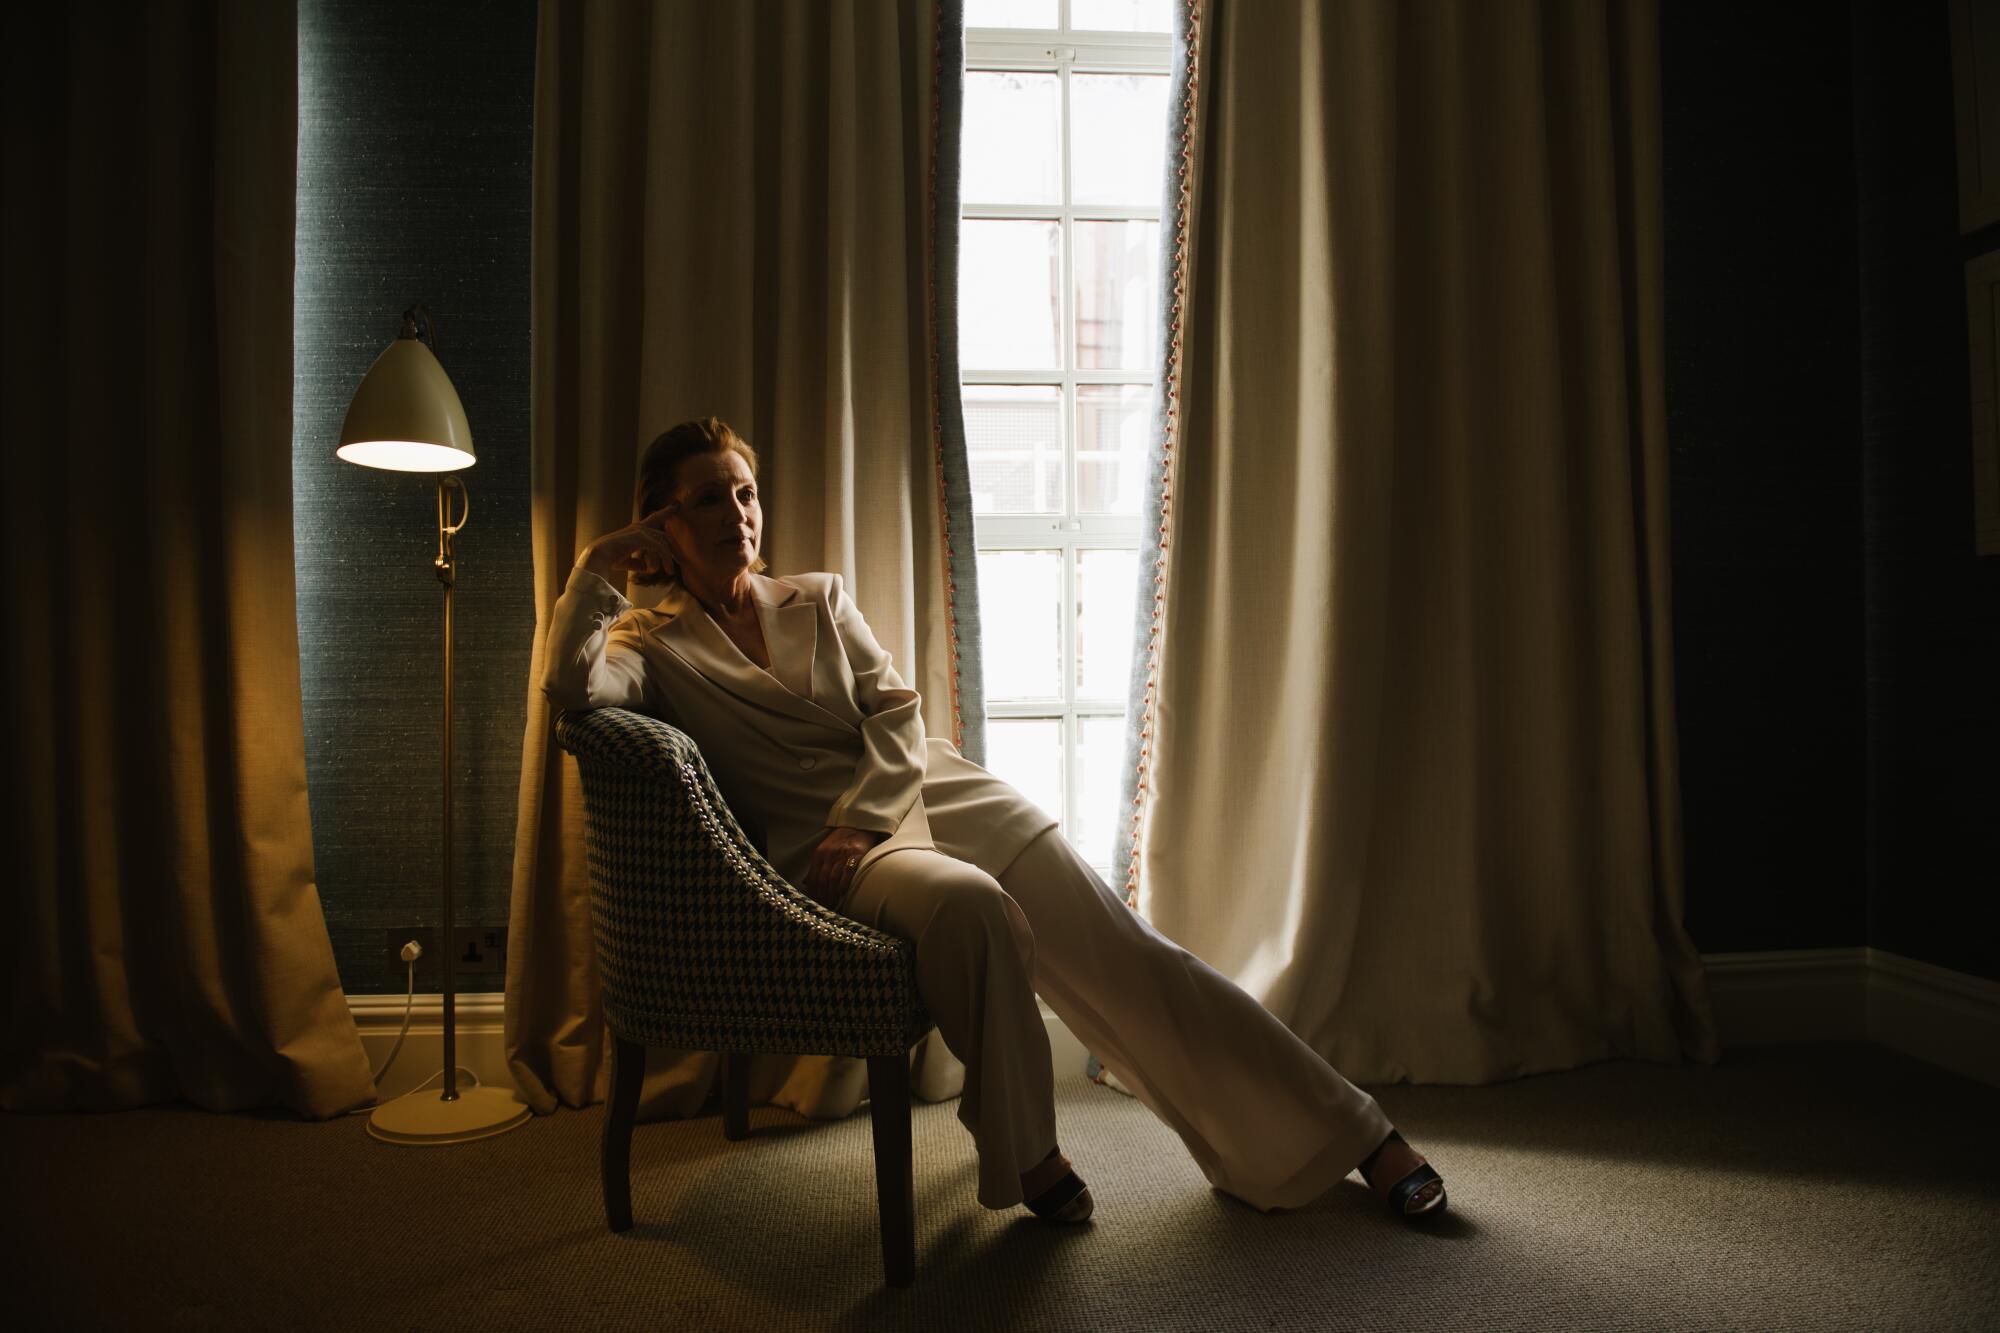 A woman in a white suit sits in a dark room with fancy decor and white curtains